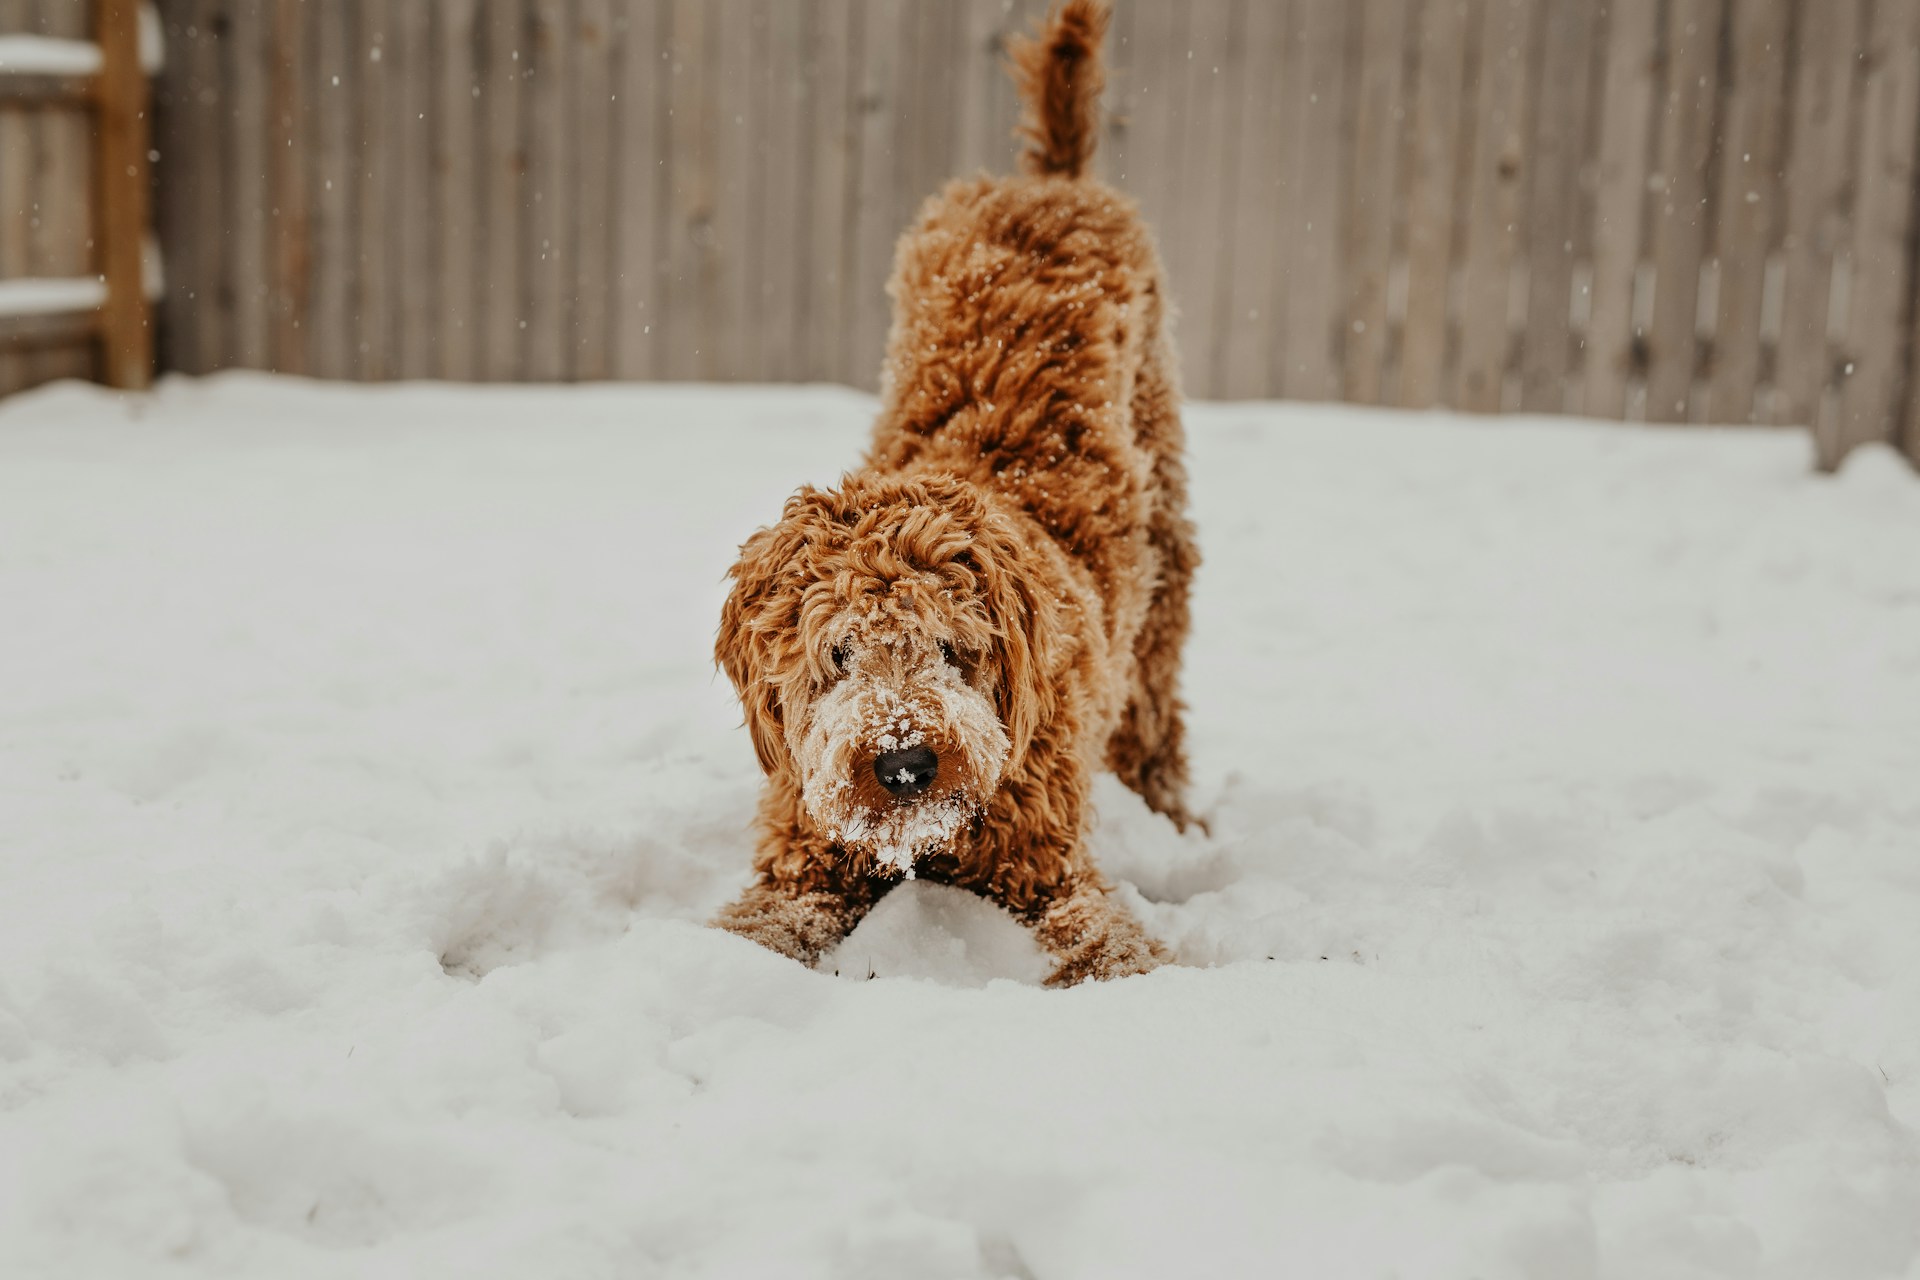 A dog playing in the snow